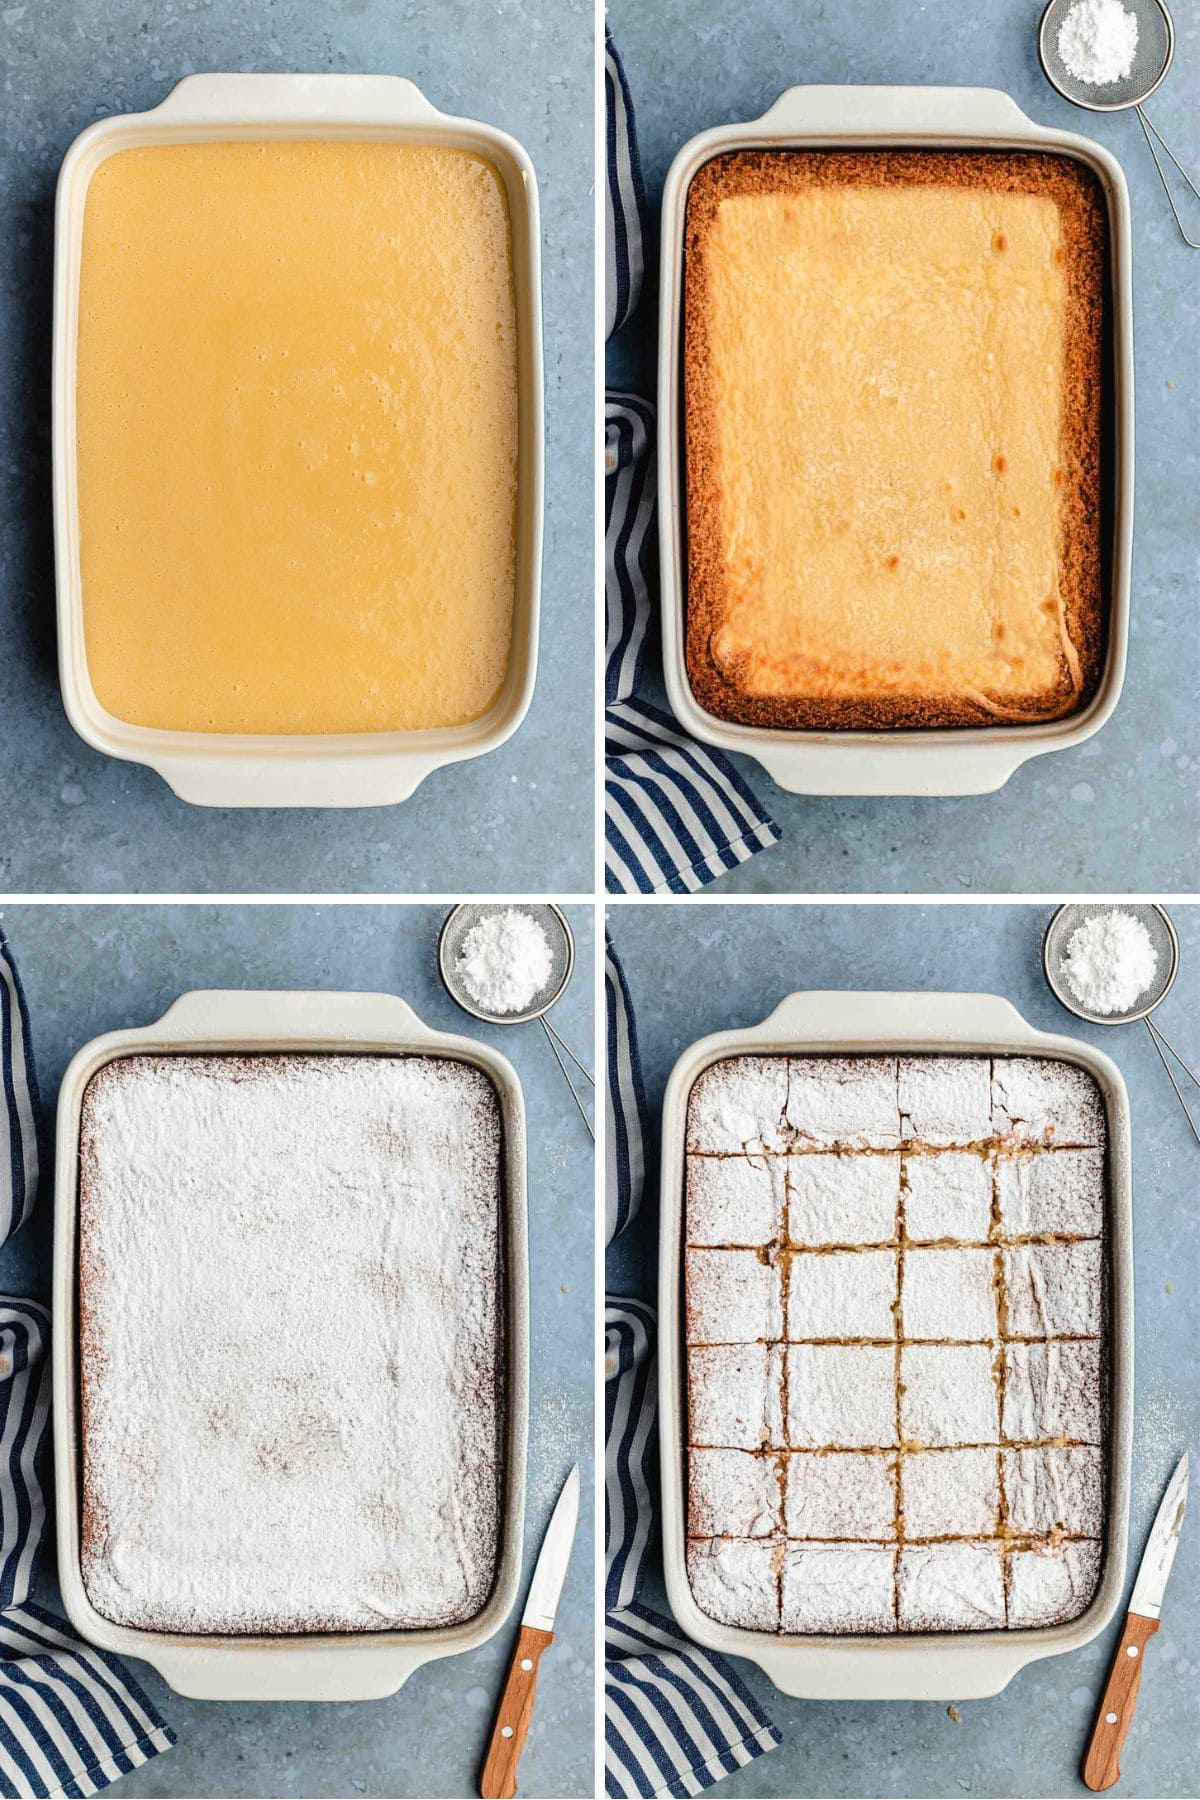 Gooey Butter Cake four picture collage, baking and frosting baked cake